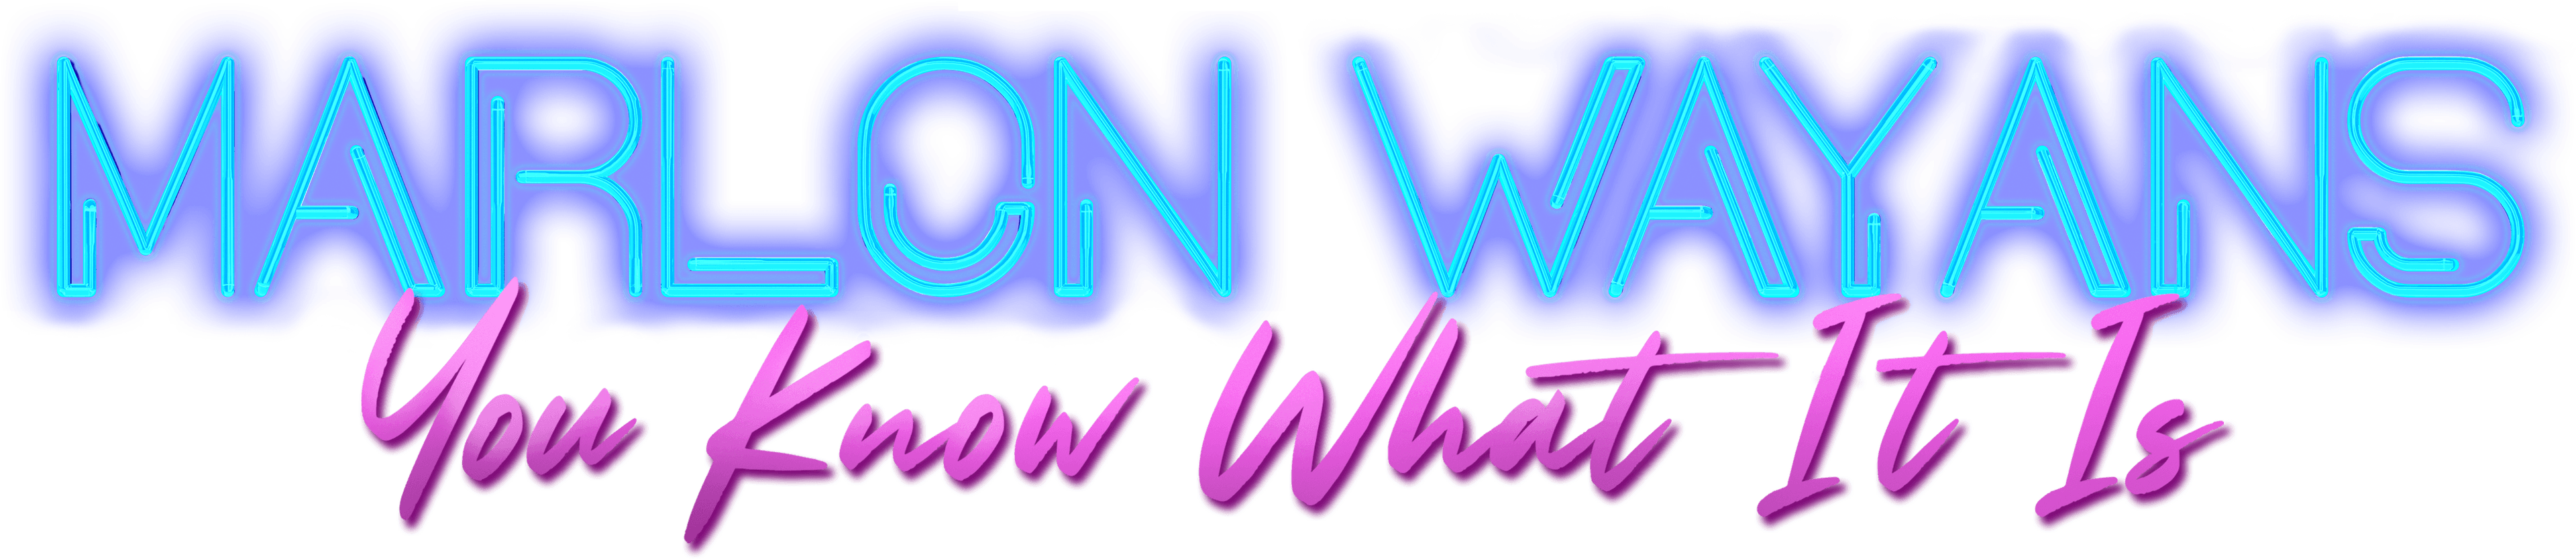 Marlon Wayans: You Know What It Is logo